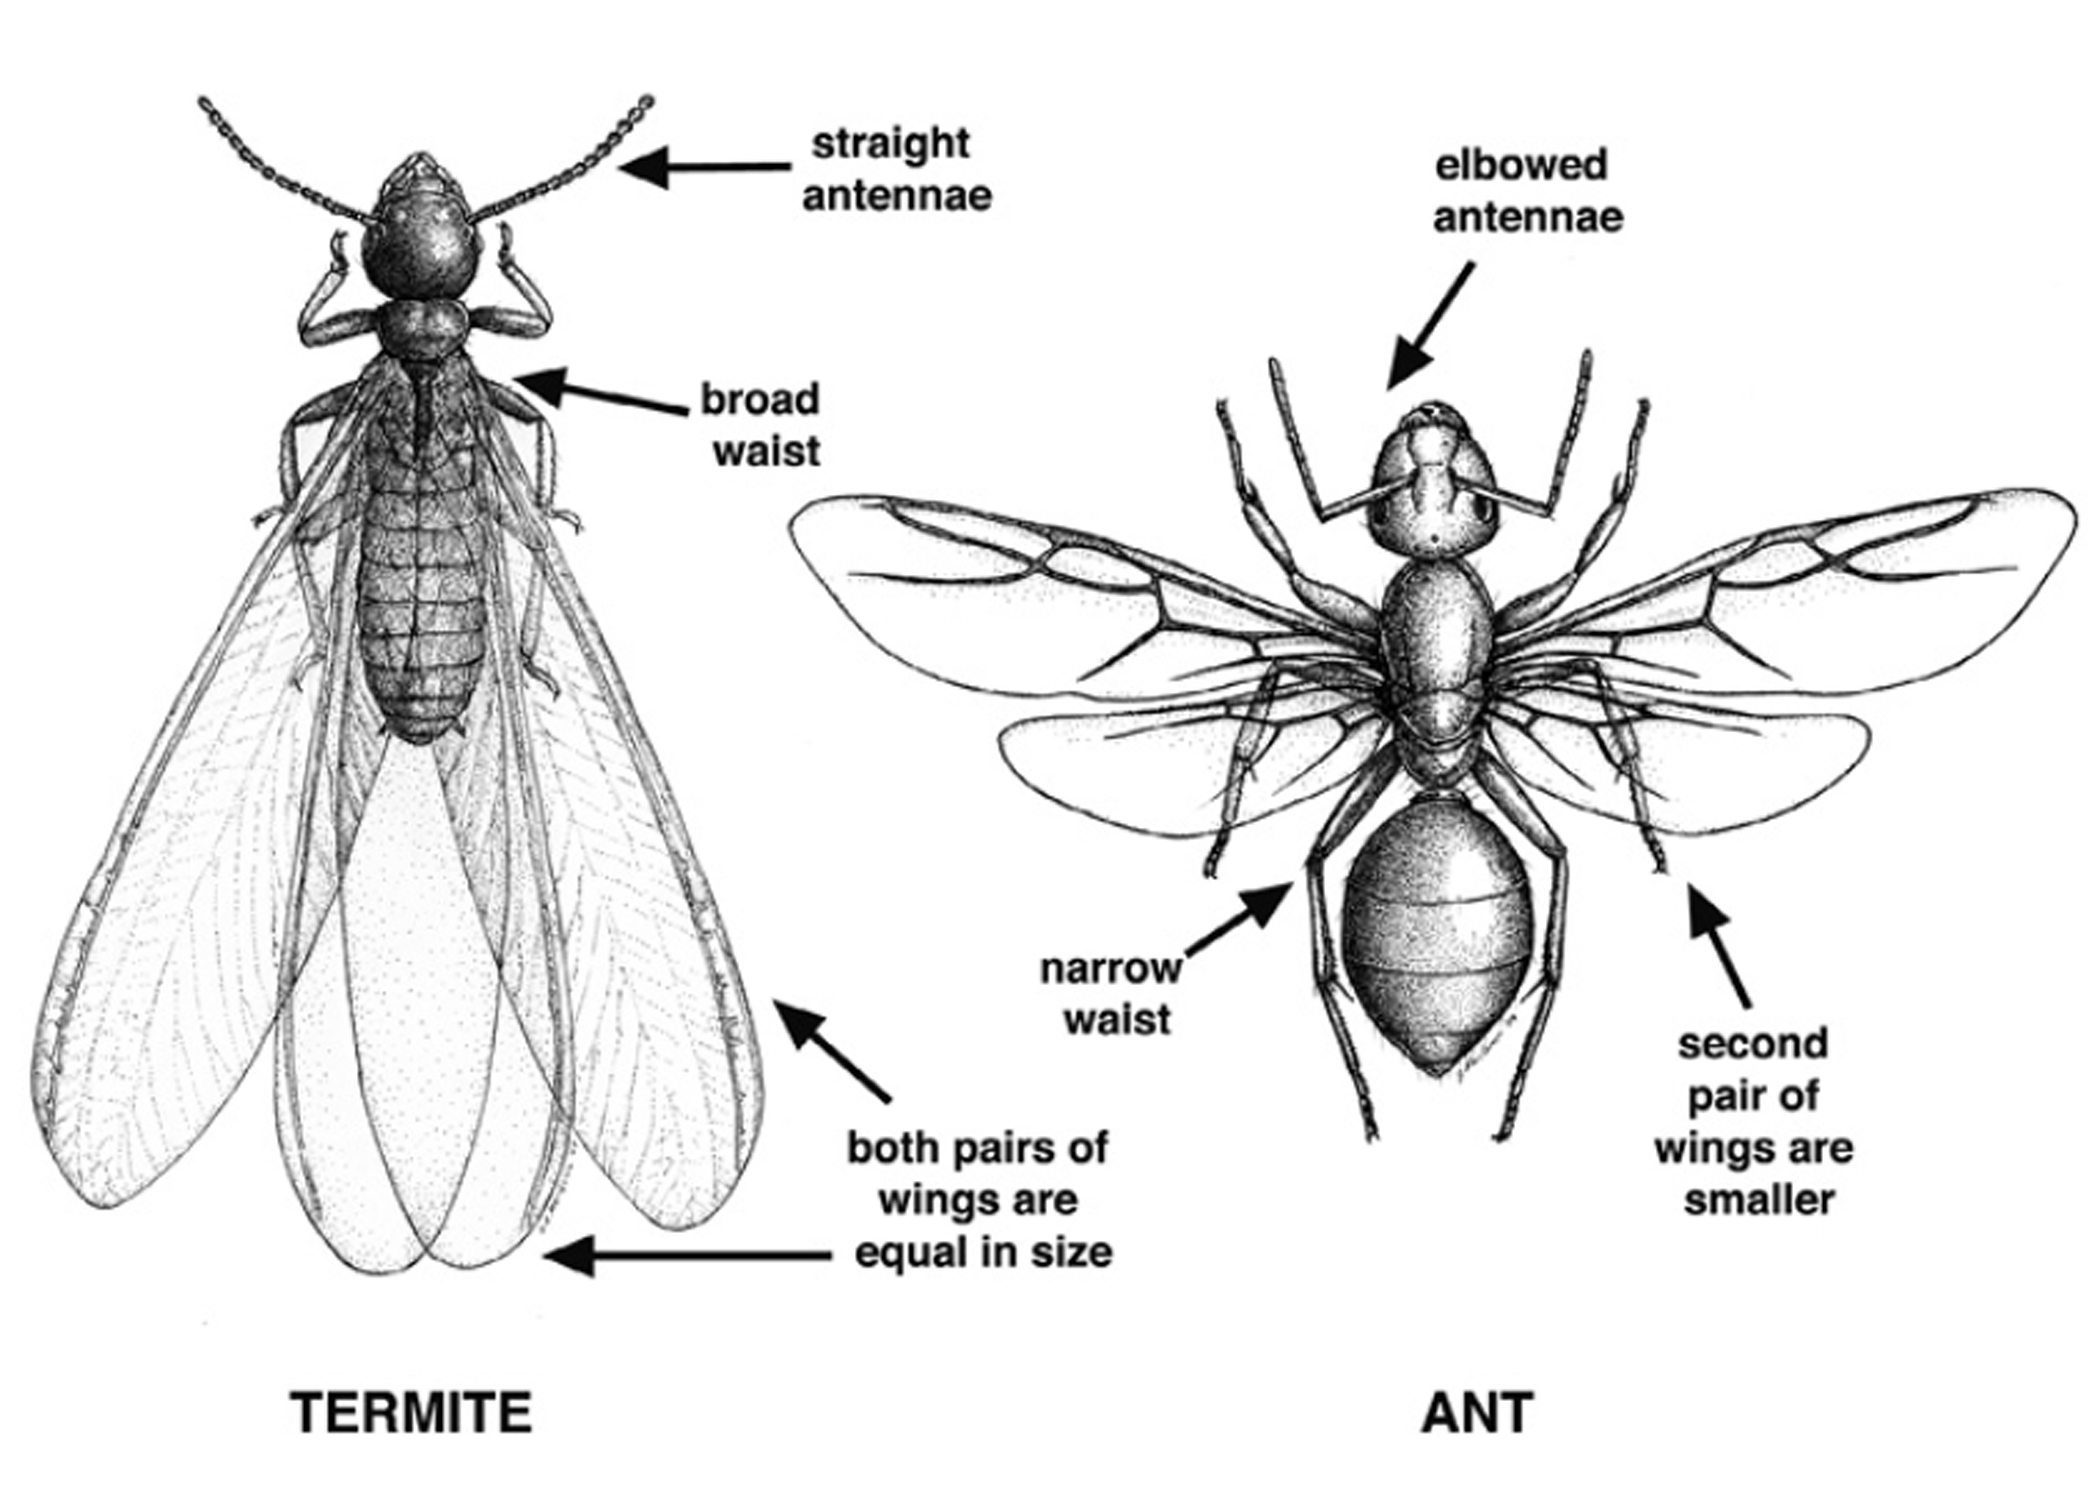 Black and white, labeled drawing of a winged termite and winged ant.